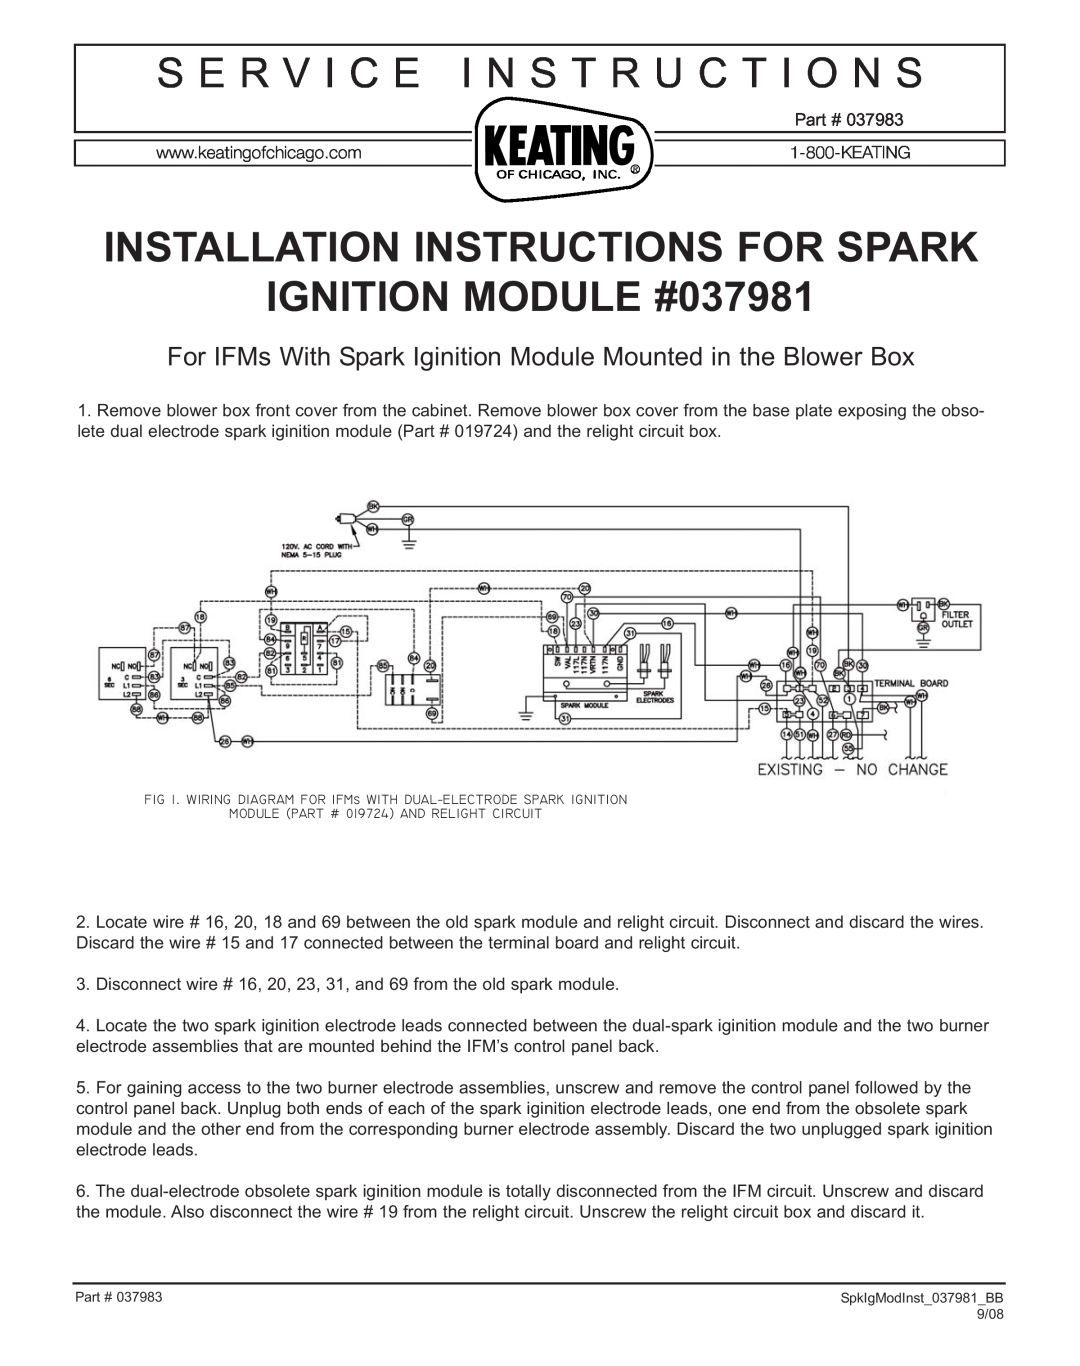 Keating Of Chicago installation instructions S E R V I C E I N S T R U C T I O N S, IGNITION MODULE #037981 